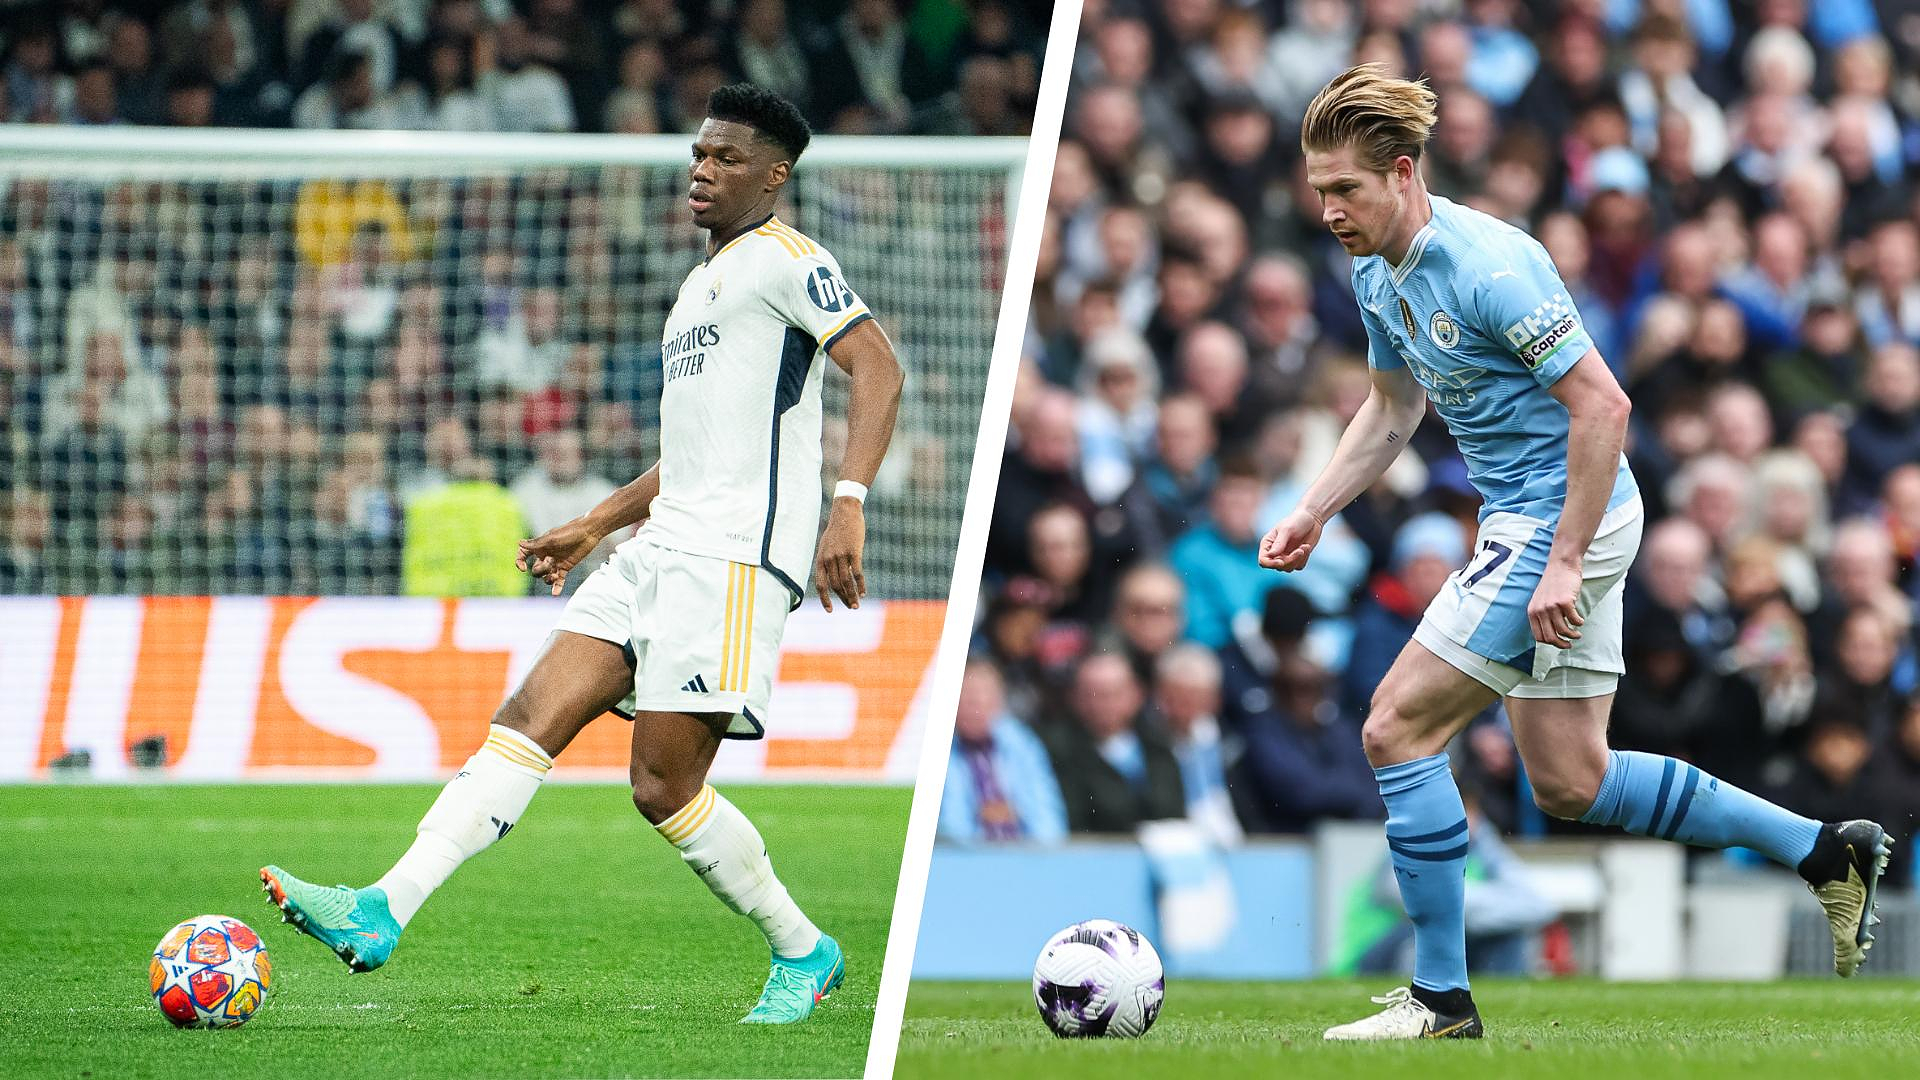 Champions League: Tchouaméni in central defense, De Bruyne on the bench... The lineups of Real Madrid-Manchester City